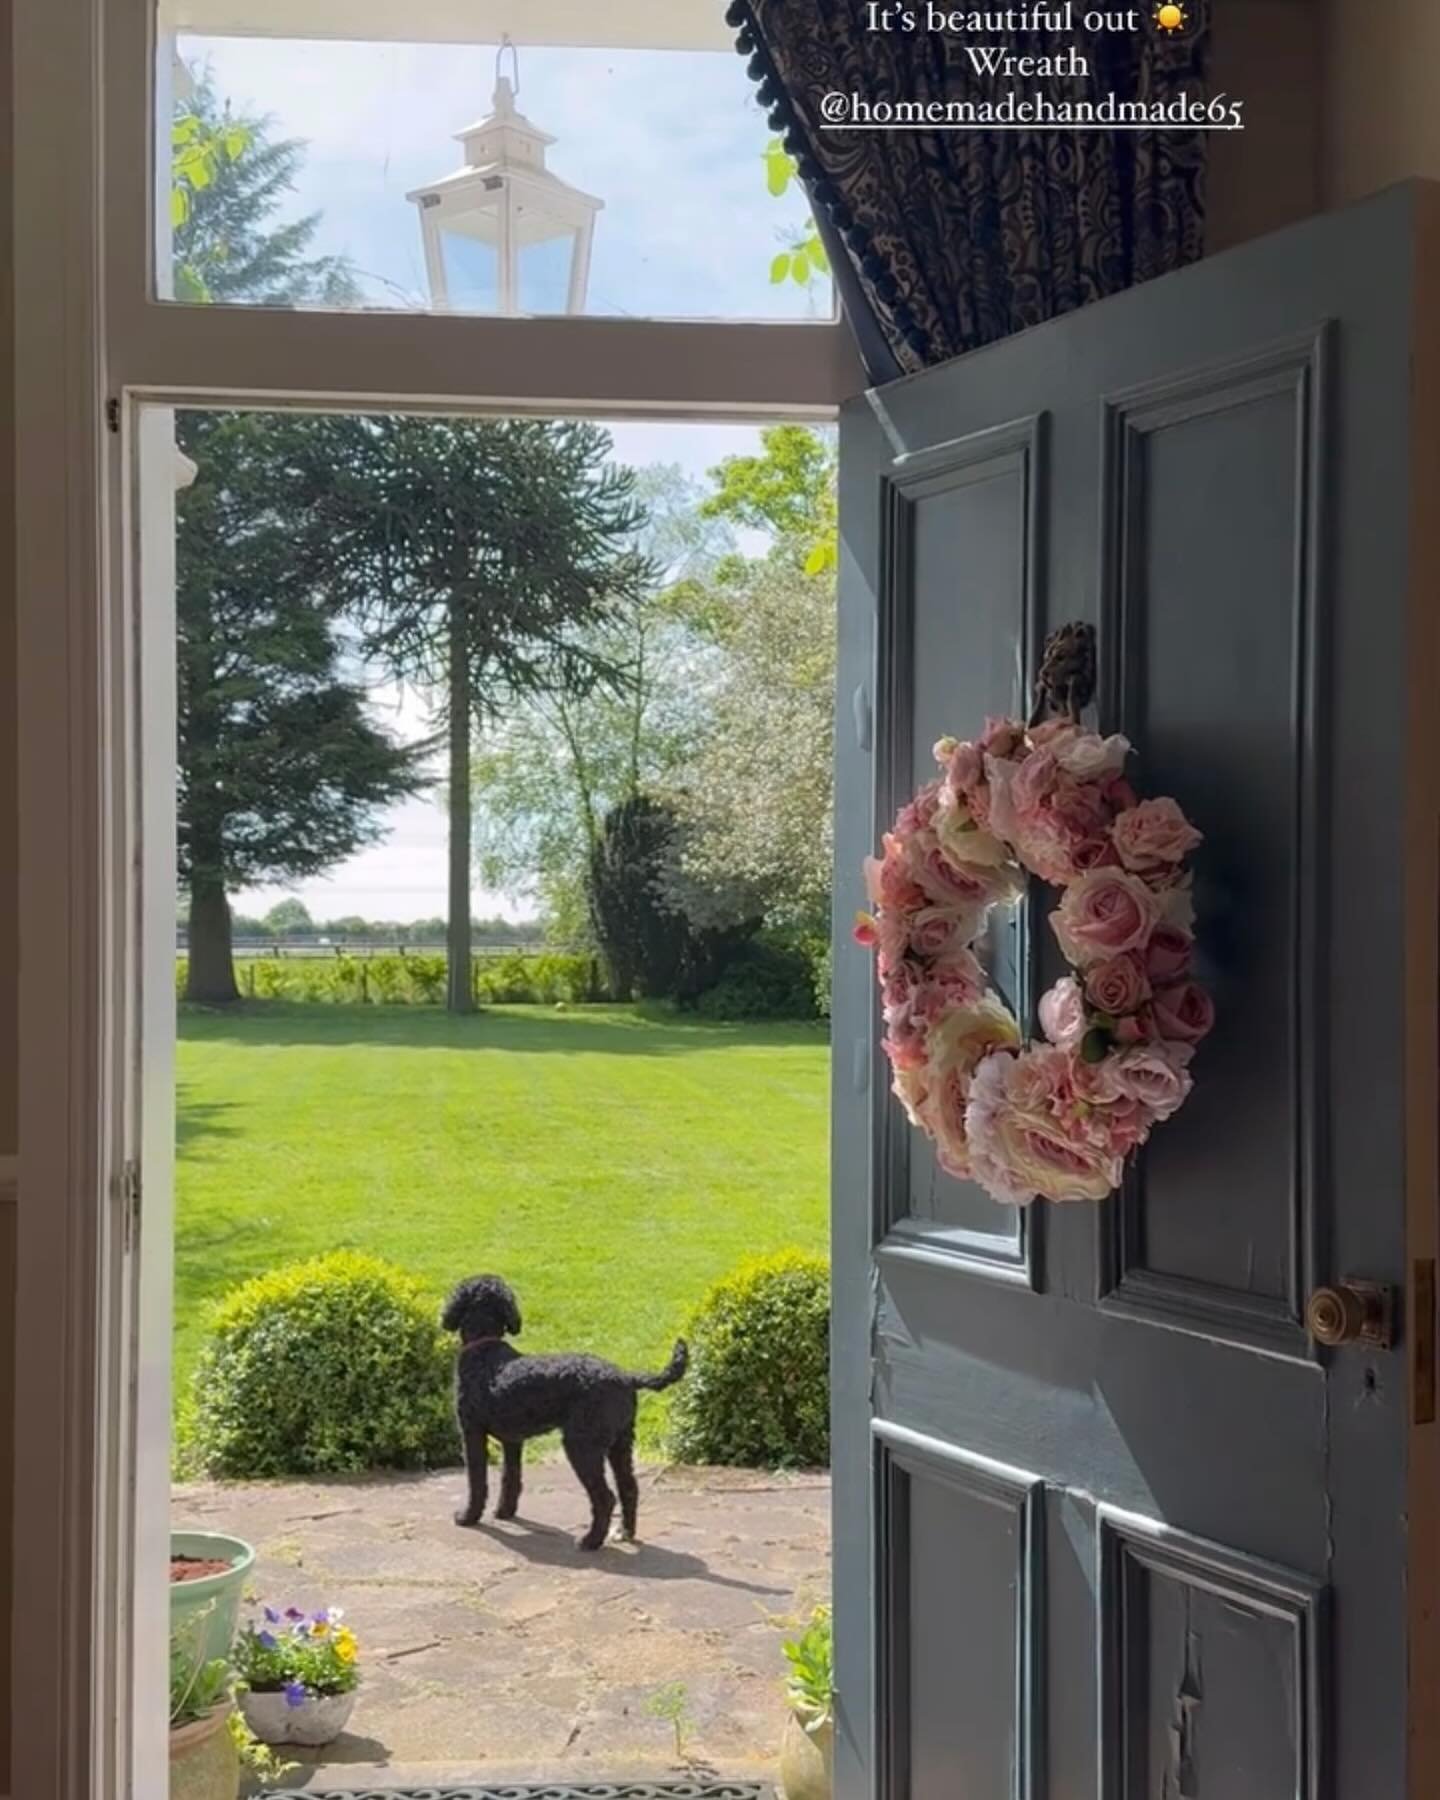 Suns out and the road is packed with visitors to the beach. Luckily we went early for Nellys walk. Day of washing on the line and wreathing. This beautiful pic is from Charlotte @charlotteclarkhome of her stunning home and summer blooms wreath xx  #s